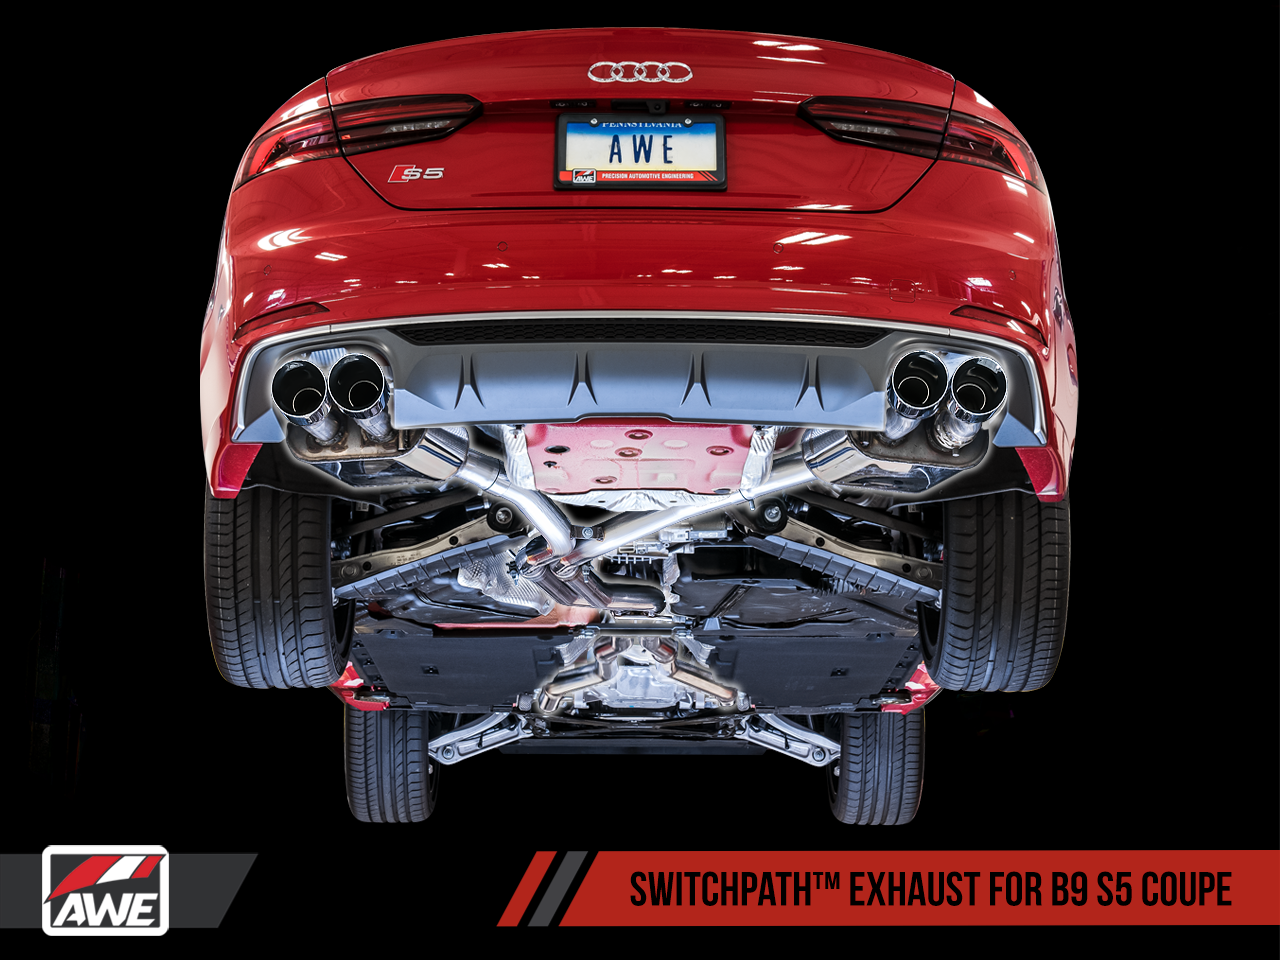 AWE Touring Edition Exhaust for Audi B9 S5 Coupe - Motorsports LA